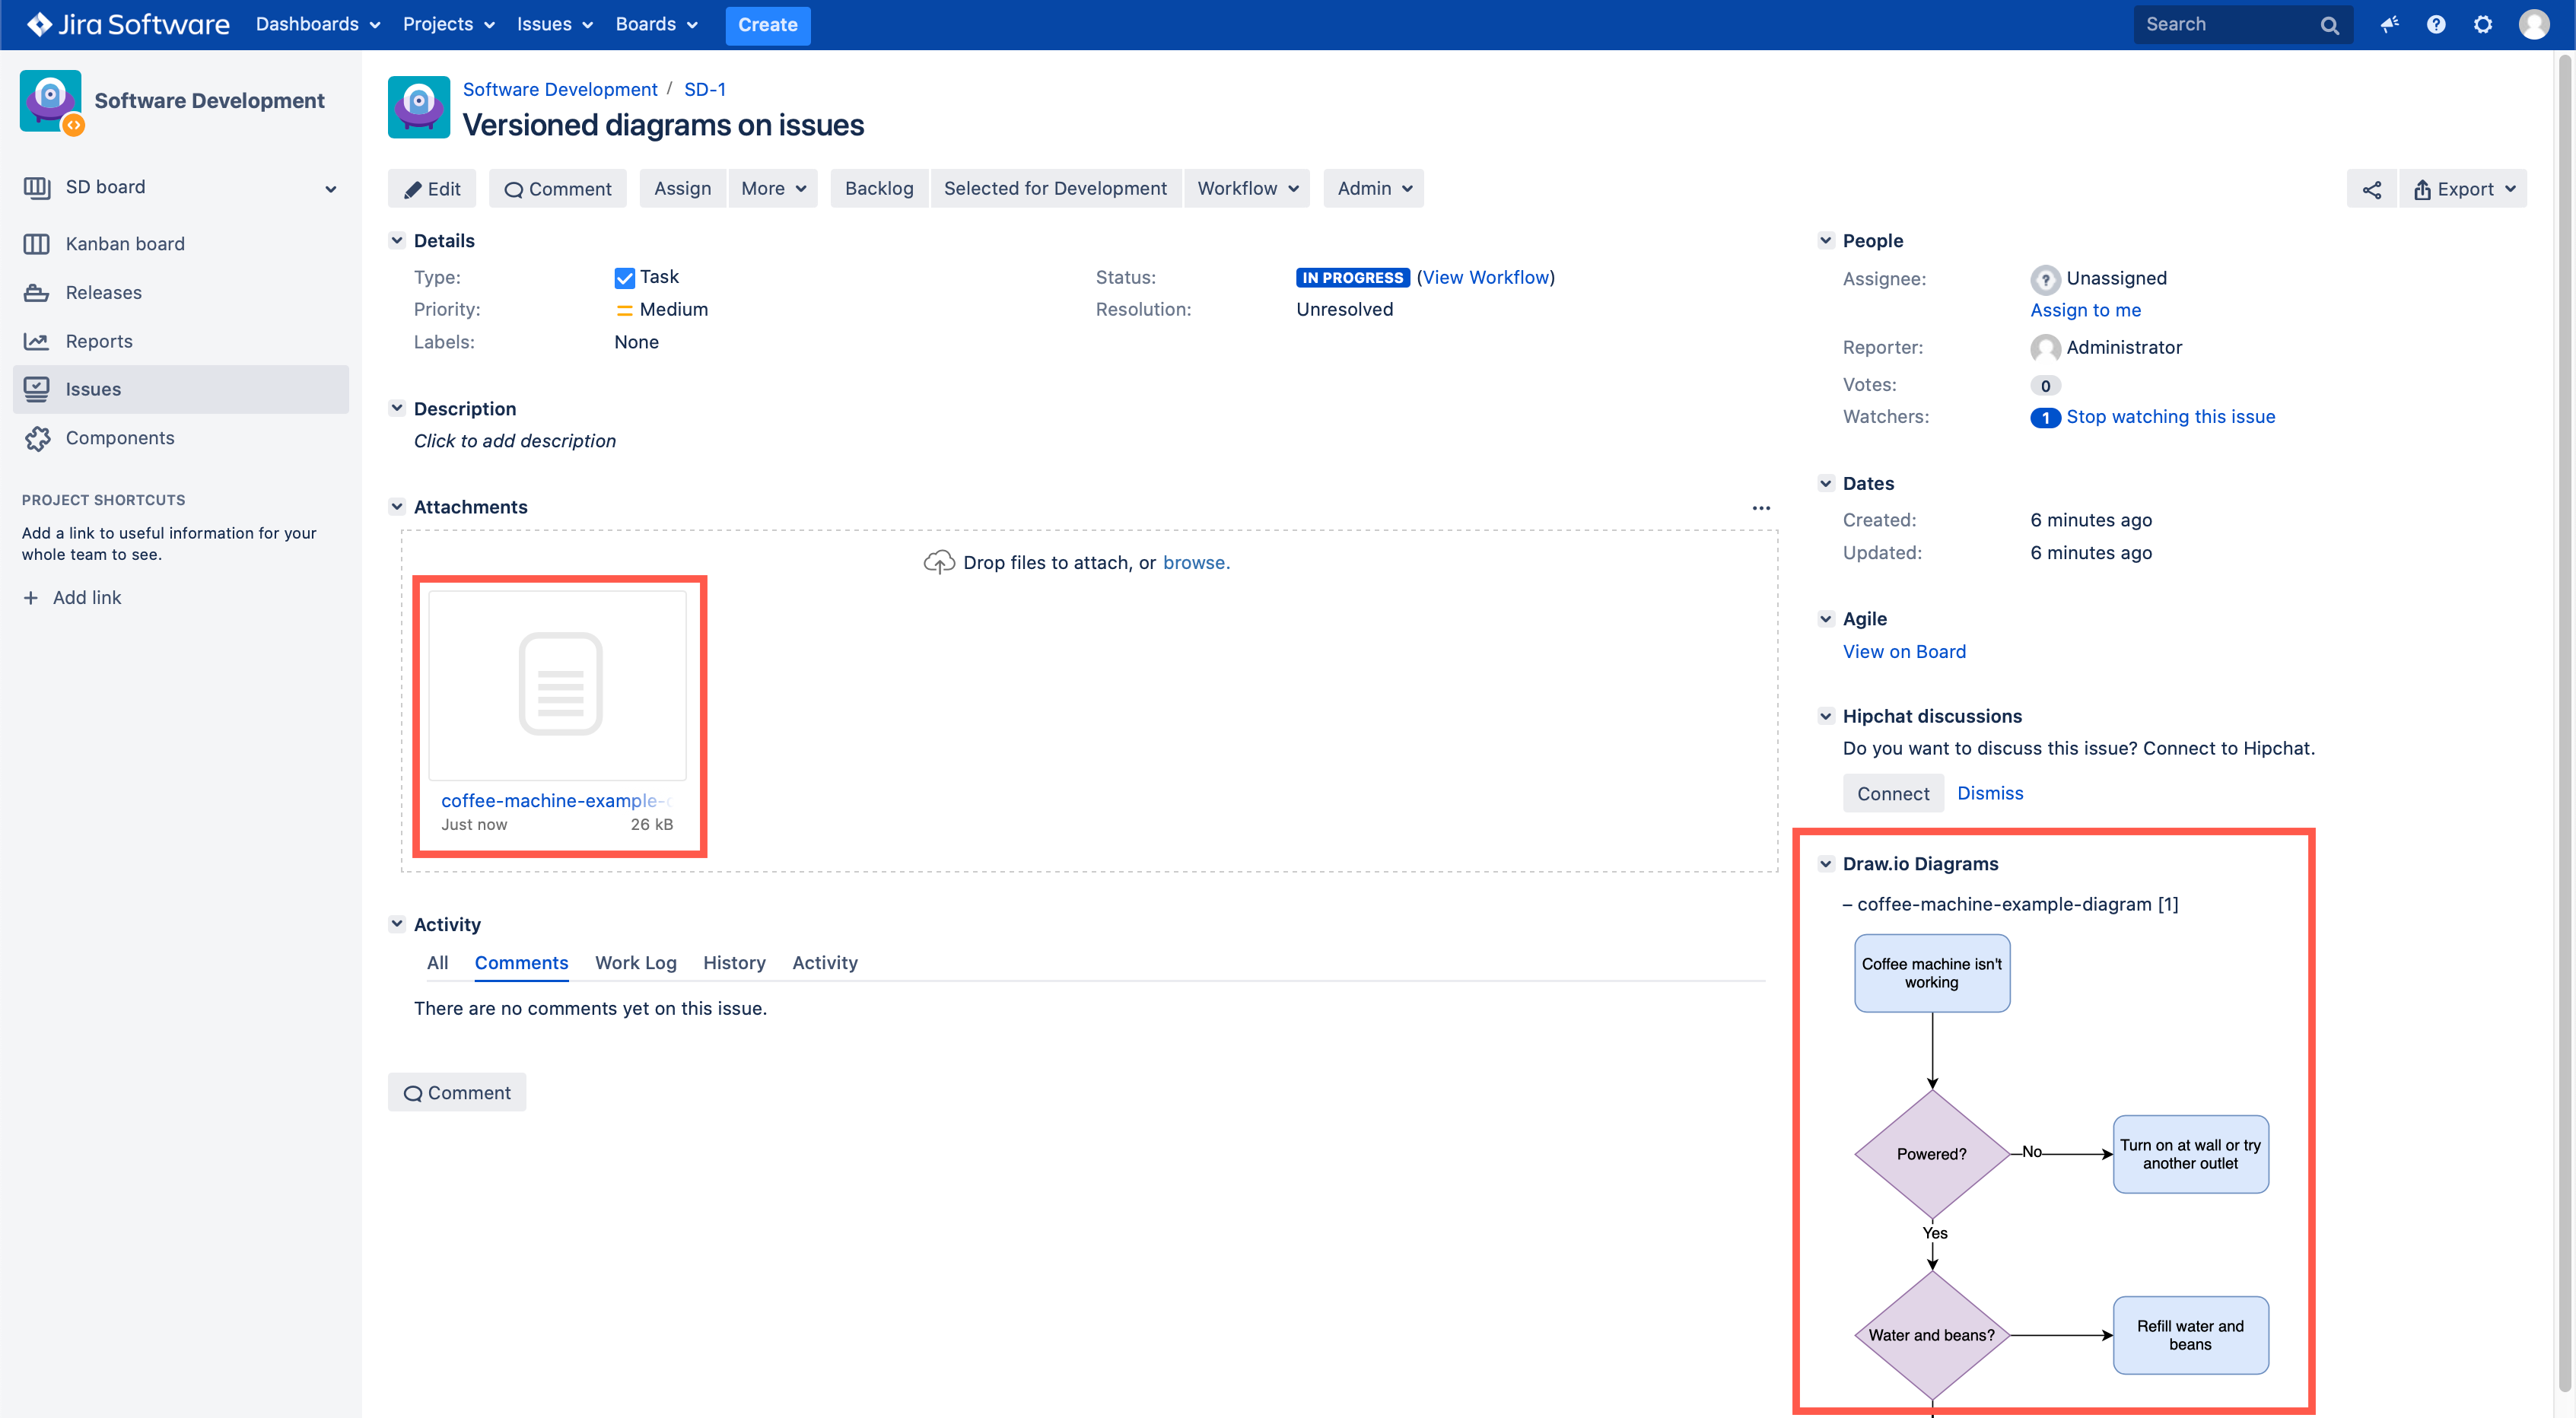 The draw.io diagram is displayed on the right of your Jira Server issue